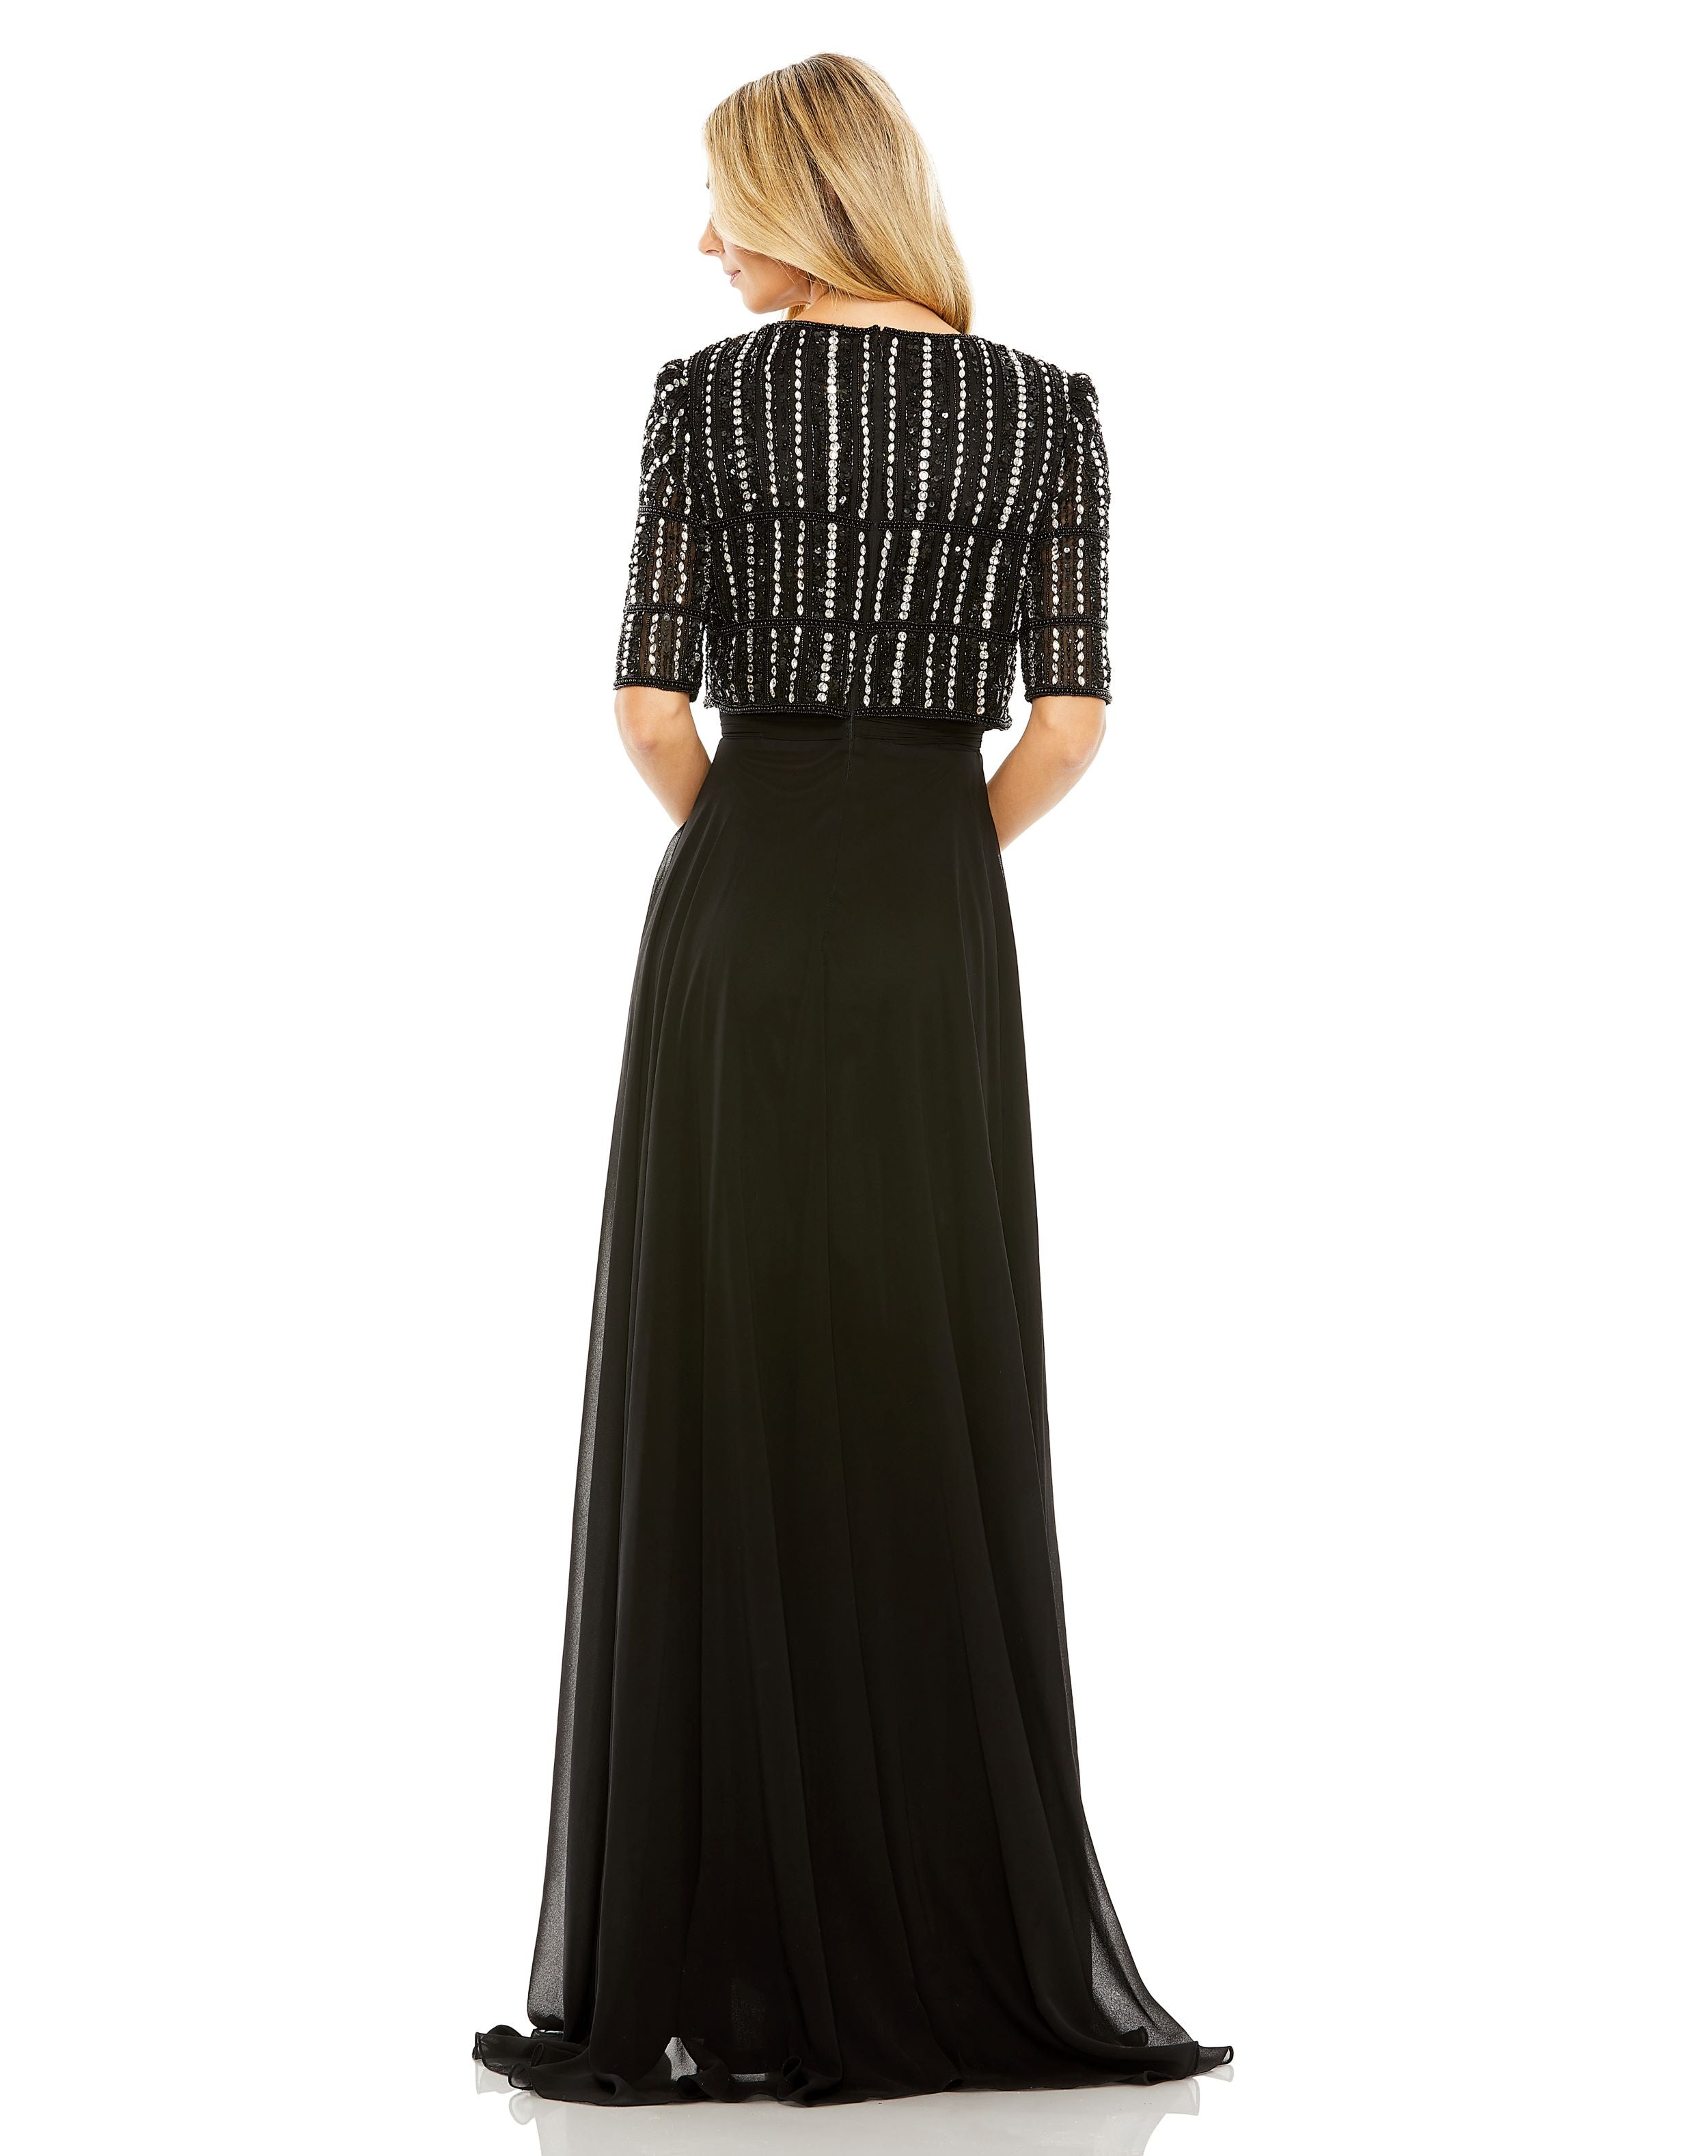 Chiffon Gown w/ Fully Beaded 3/4 Sleeve Top